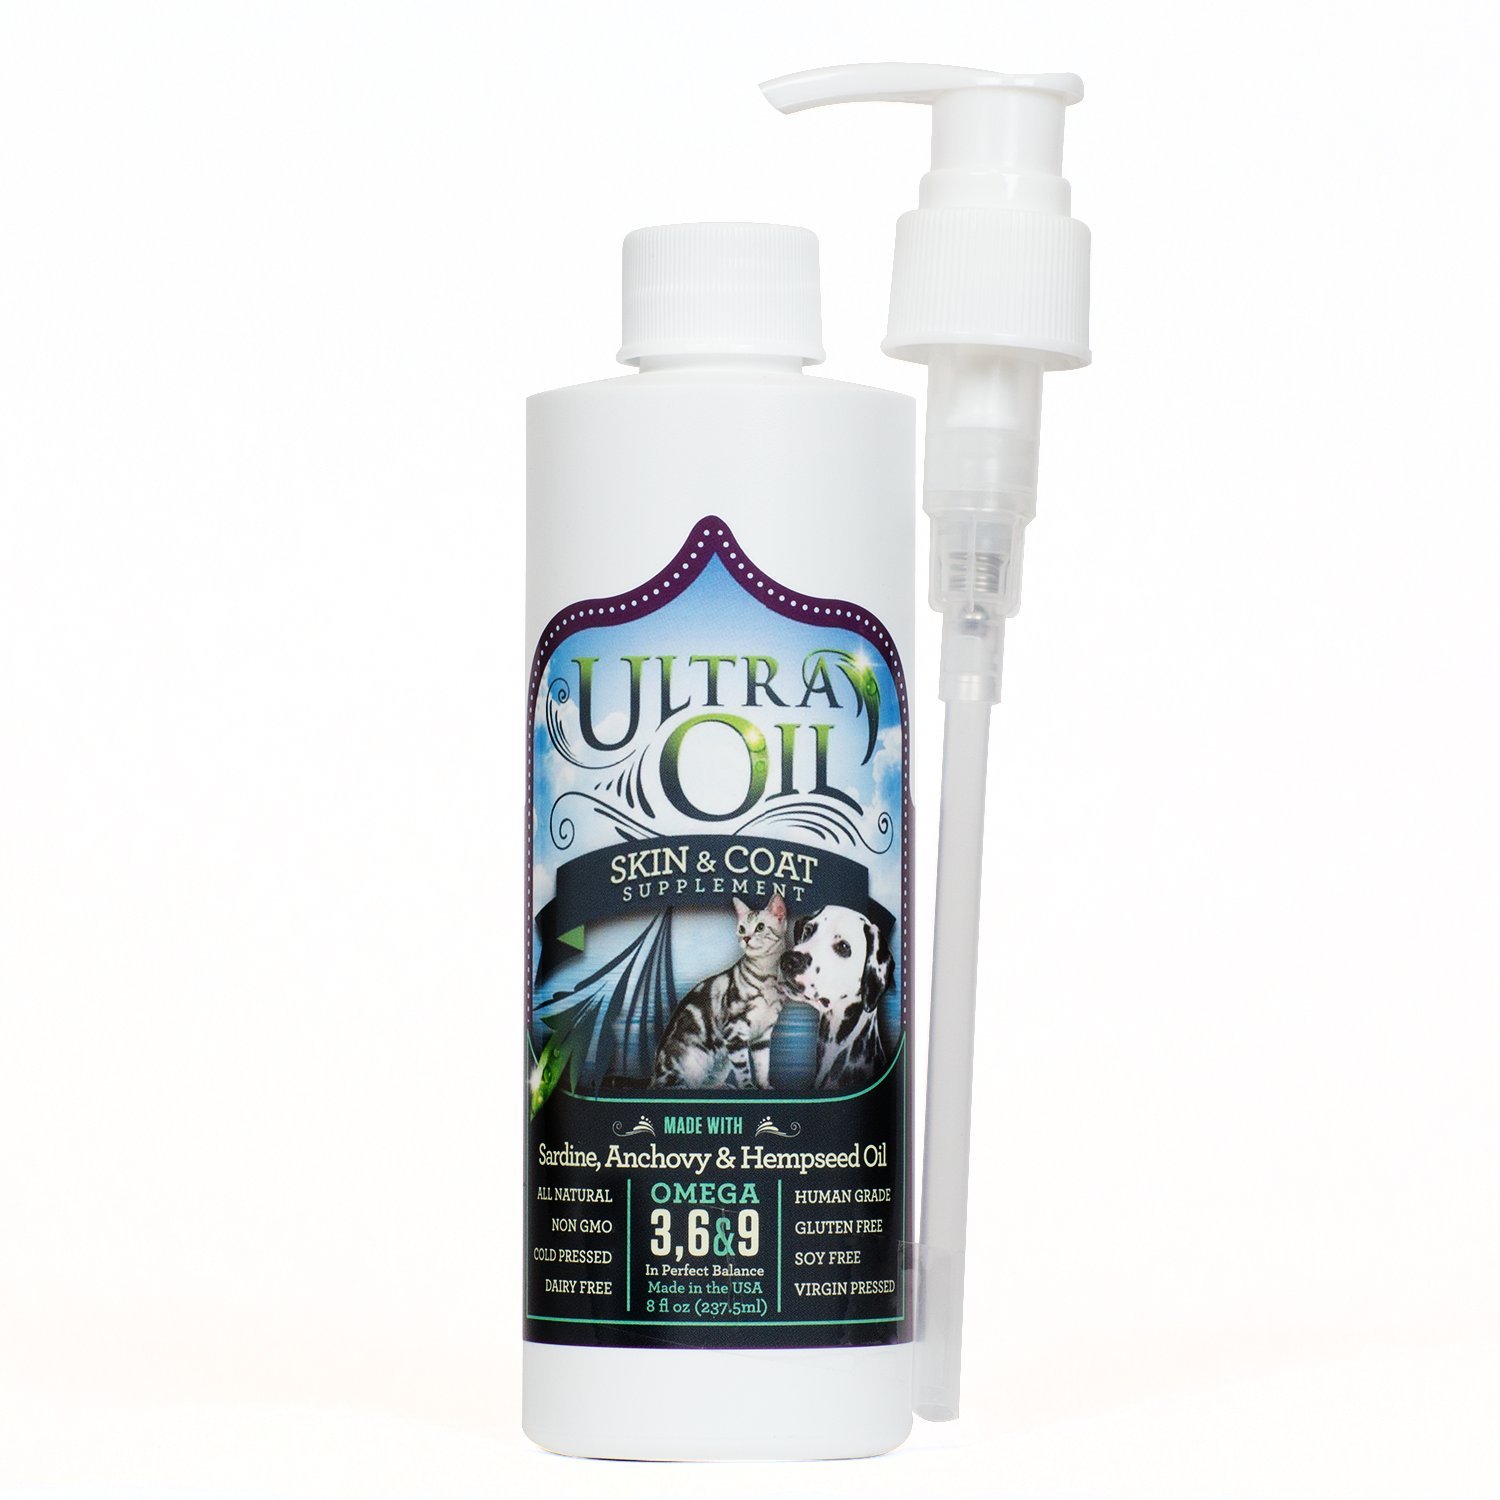  Ultra Oil Skin & Coat Supplement Ultra Oil Skin and Coat Supplement for Dogs & Cats - Hemp Seed Oil, Flaxseed Oil, Grape Seed Oil, Fish Oil for Relief from Dry Itchy Skin, Dandruff, and Allergies -...